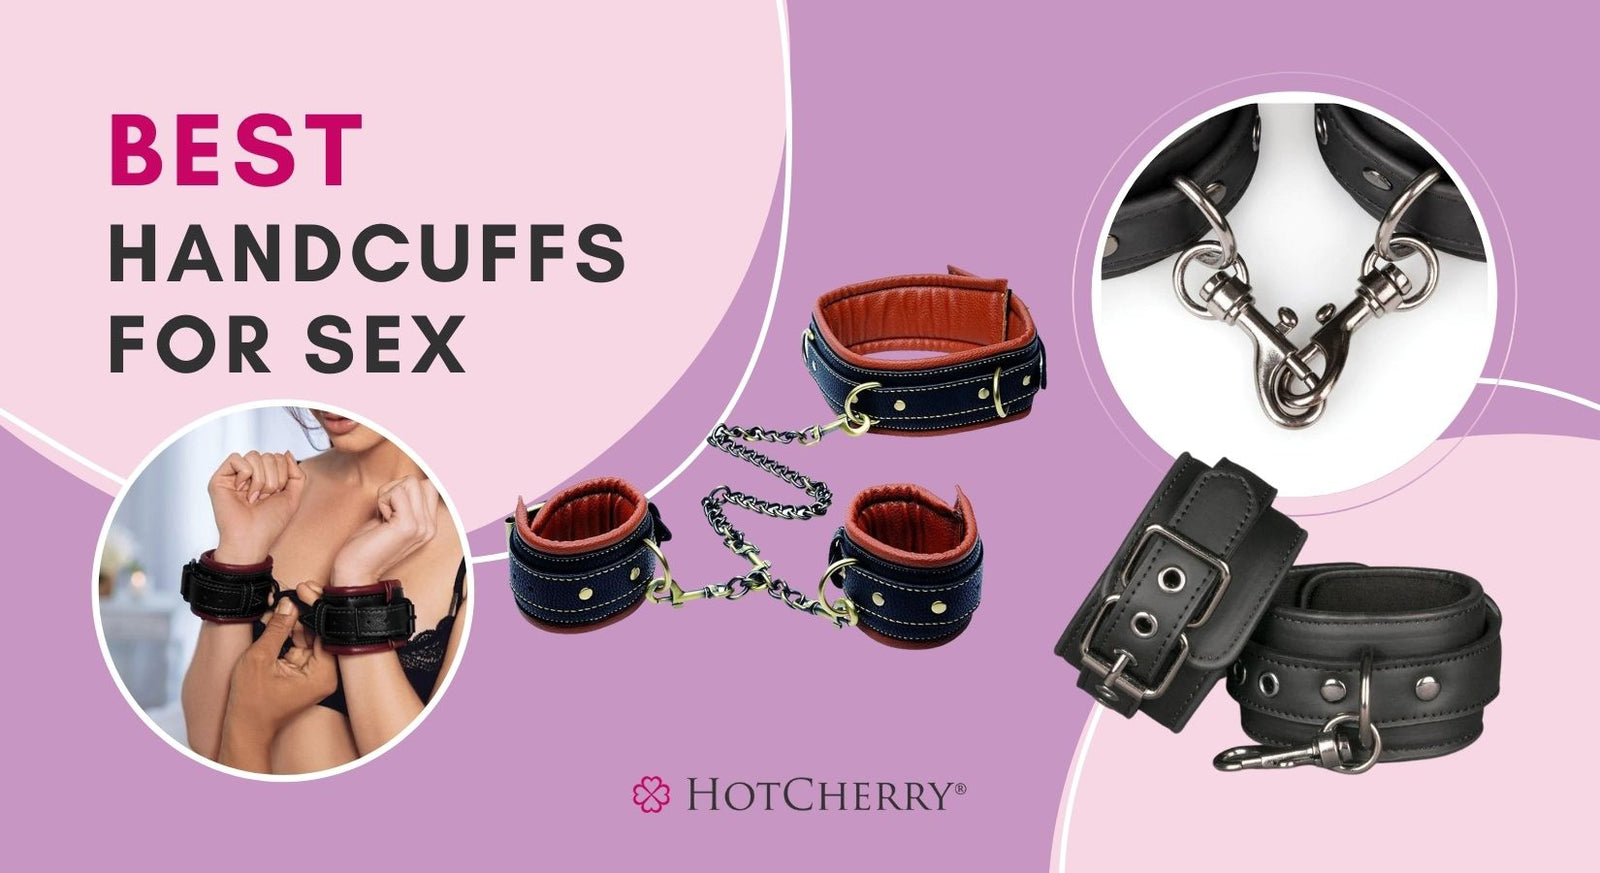 10 Best Bondage Handcuffs for Sex Reviewed